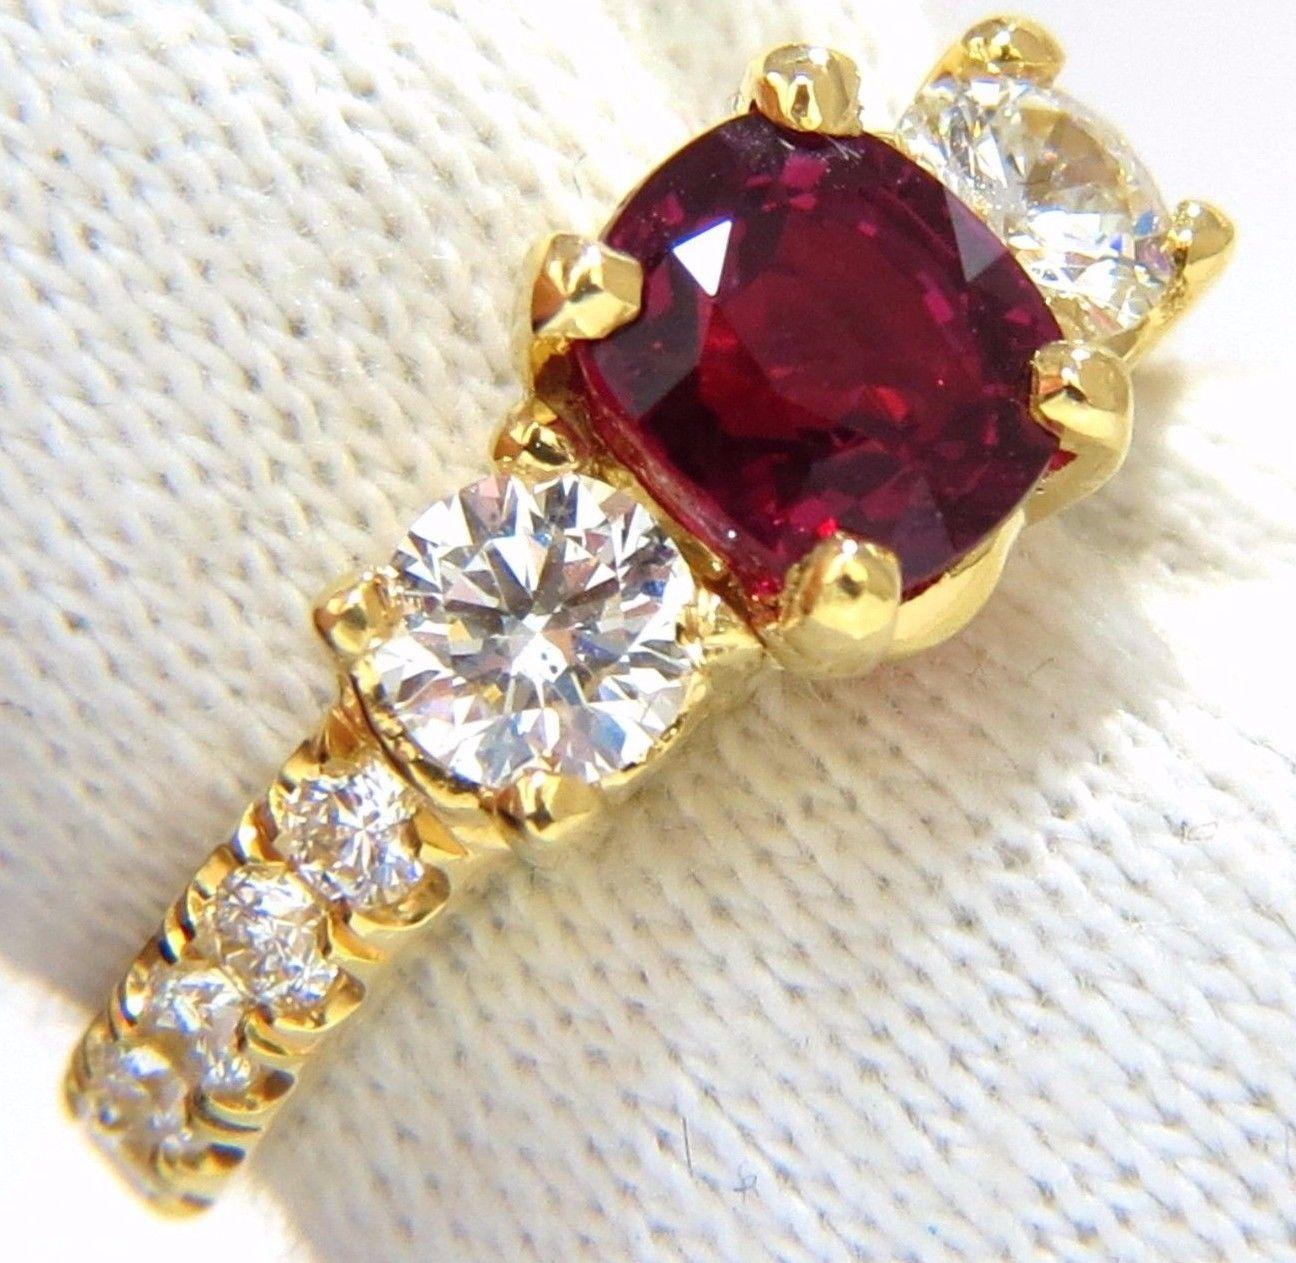 GIA Certified 2.12ct cushion cut vivid red ruby 1.06ct diamonds ring 18kt For Sale 1